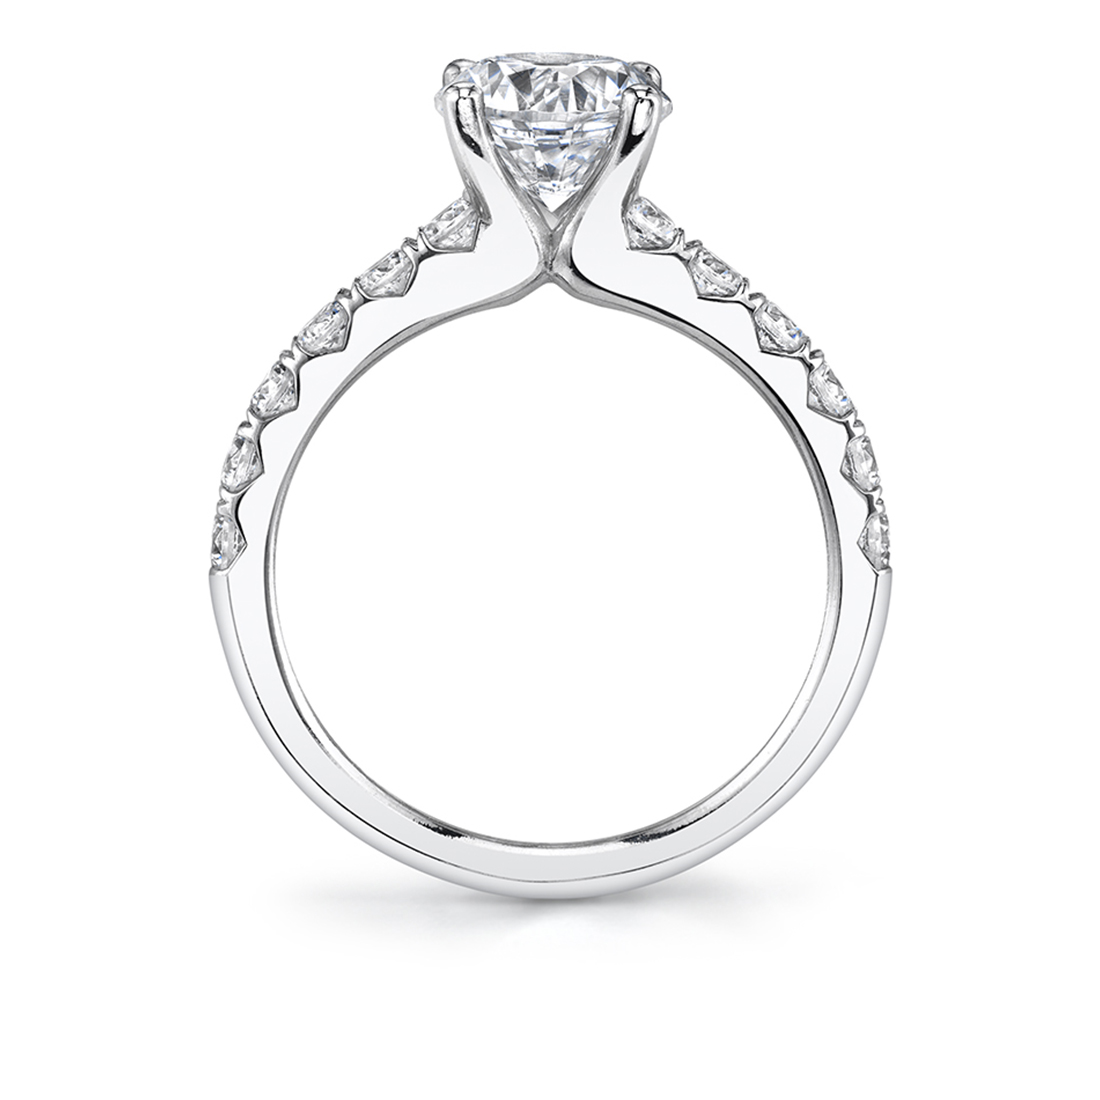 Profile Image of a Classic Engagement Ring - Adoria